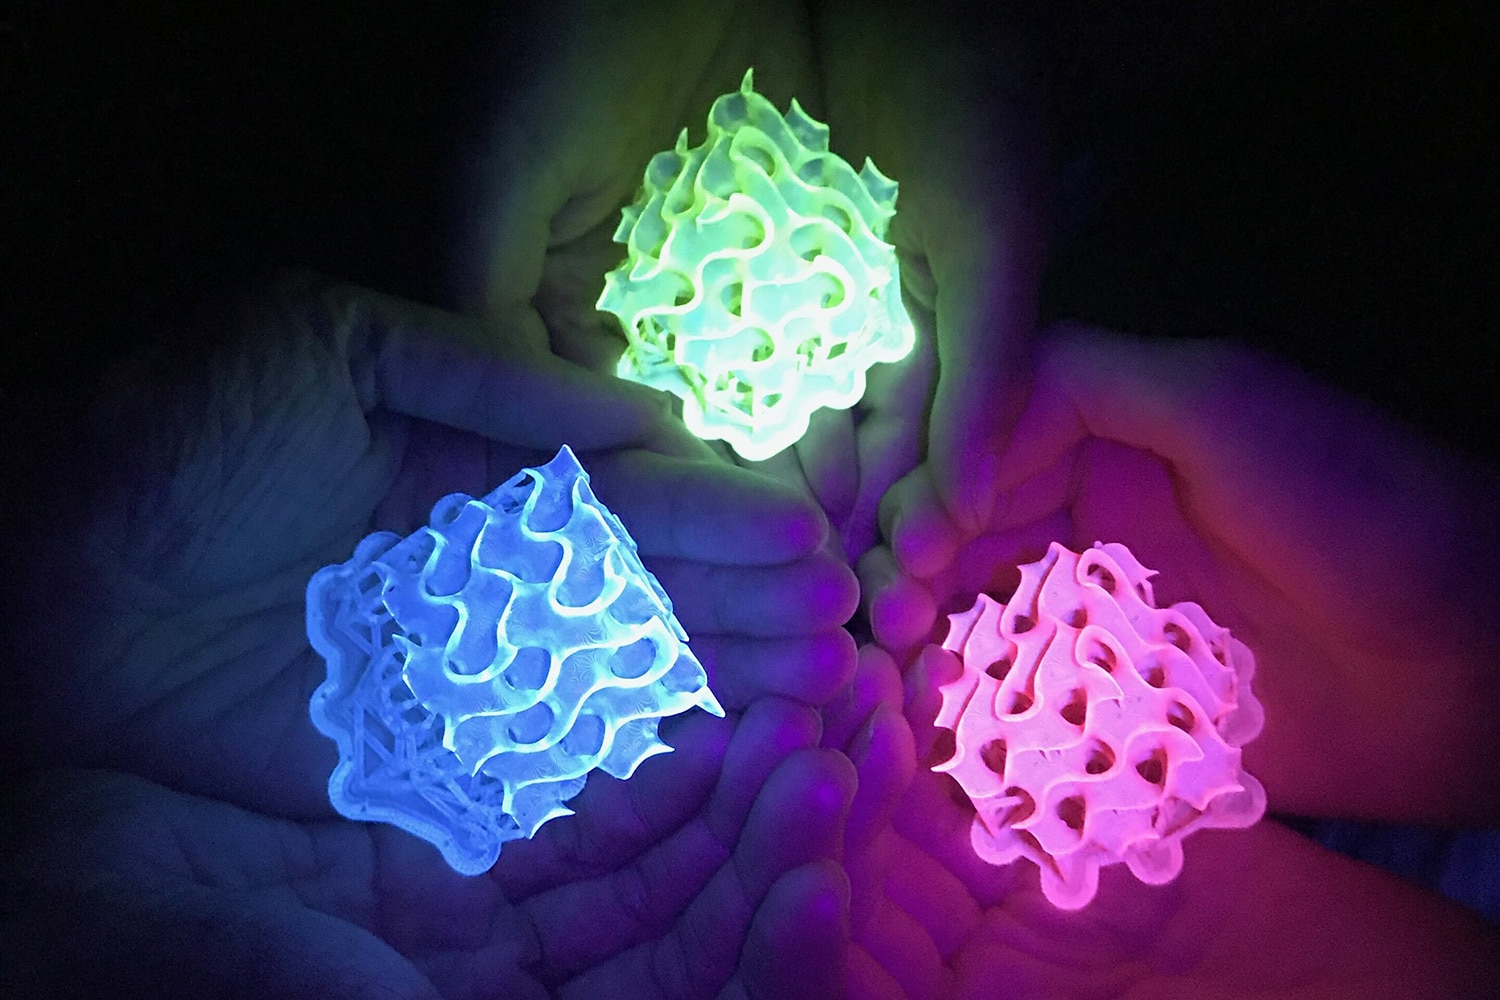 Chemists create the brightest known fluorescent materials in existence